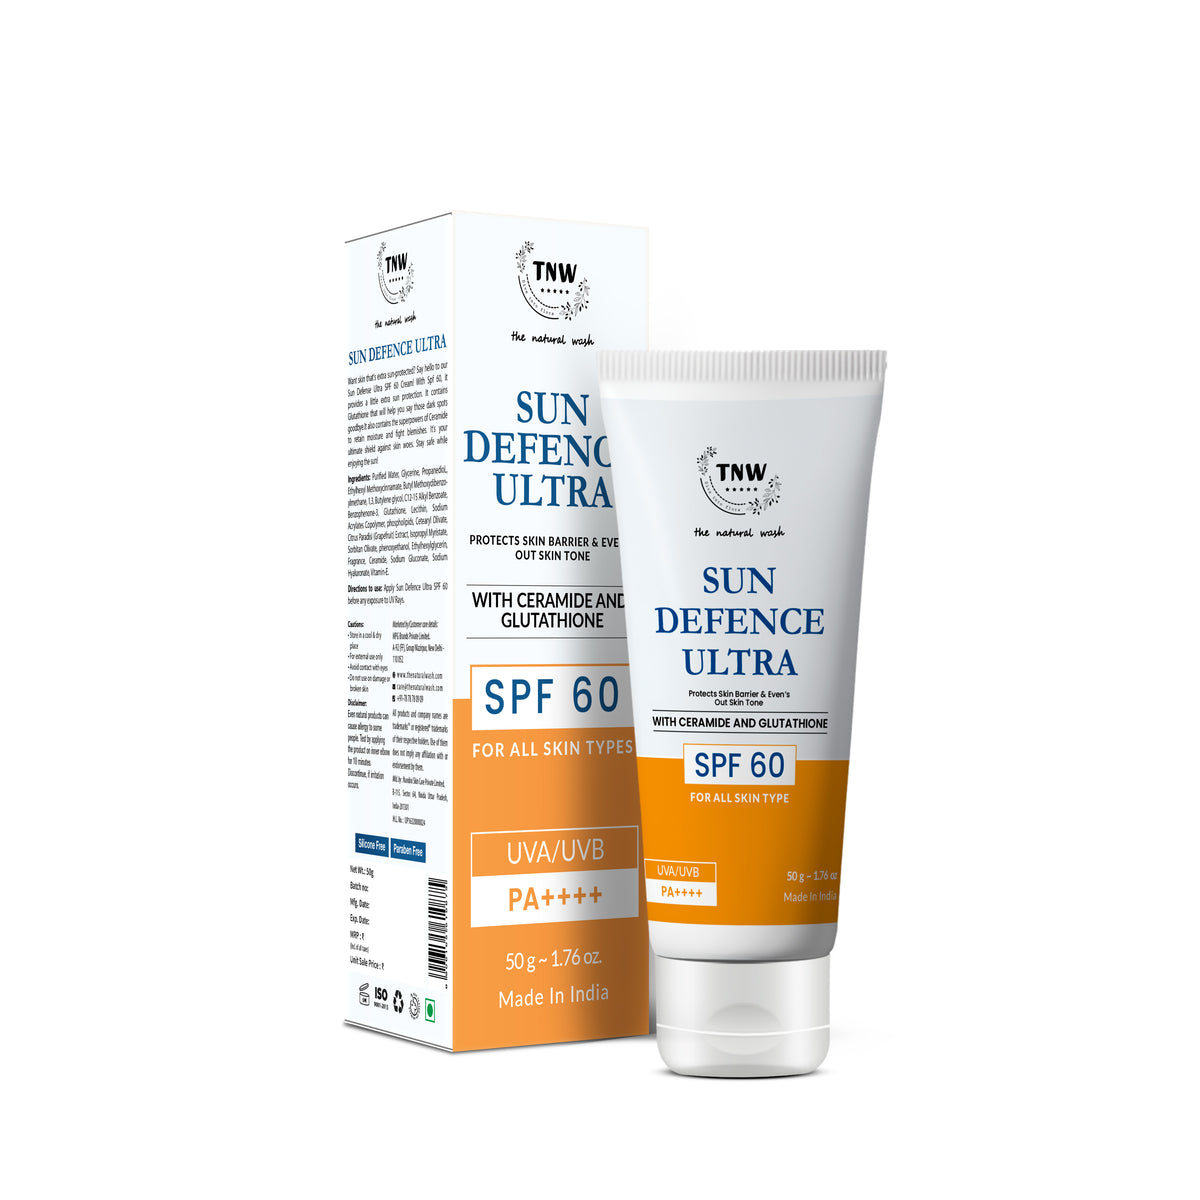 Sun Defence SPF 60 Cream with Glutathione | Protection Against UVA/UVB